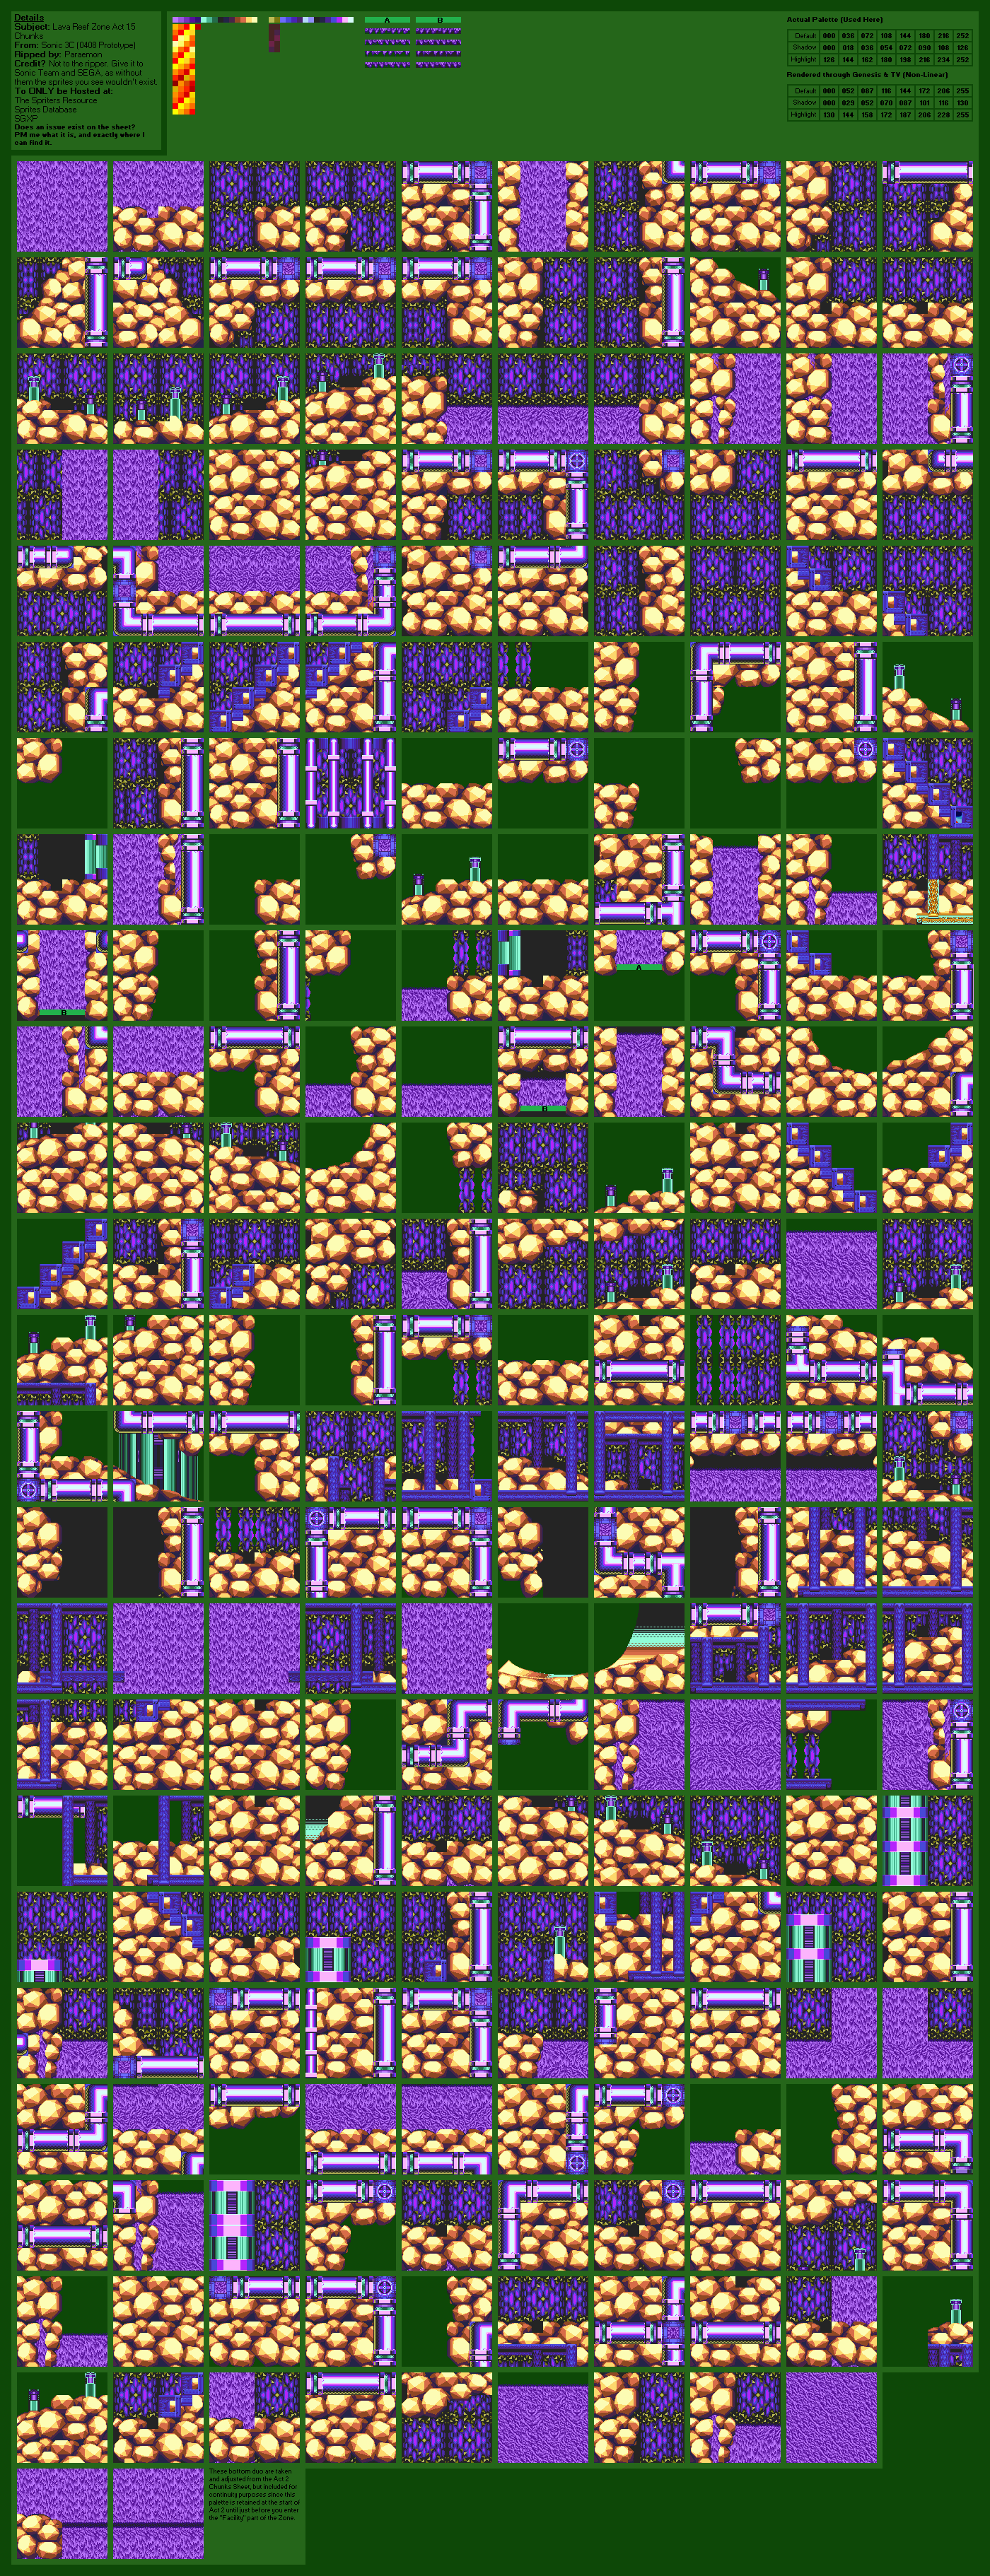 Sonic & Knuckles - Lava Reef Zone Act 1 Chunks (Prototype Act 1.5 Palette)